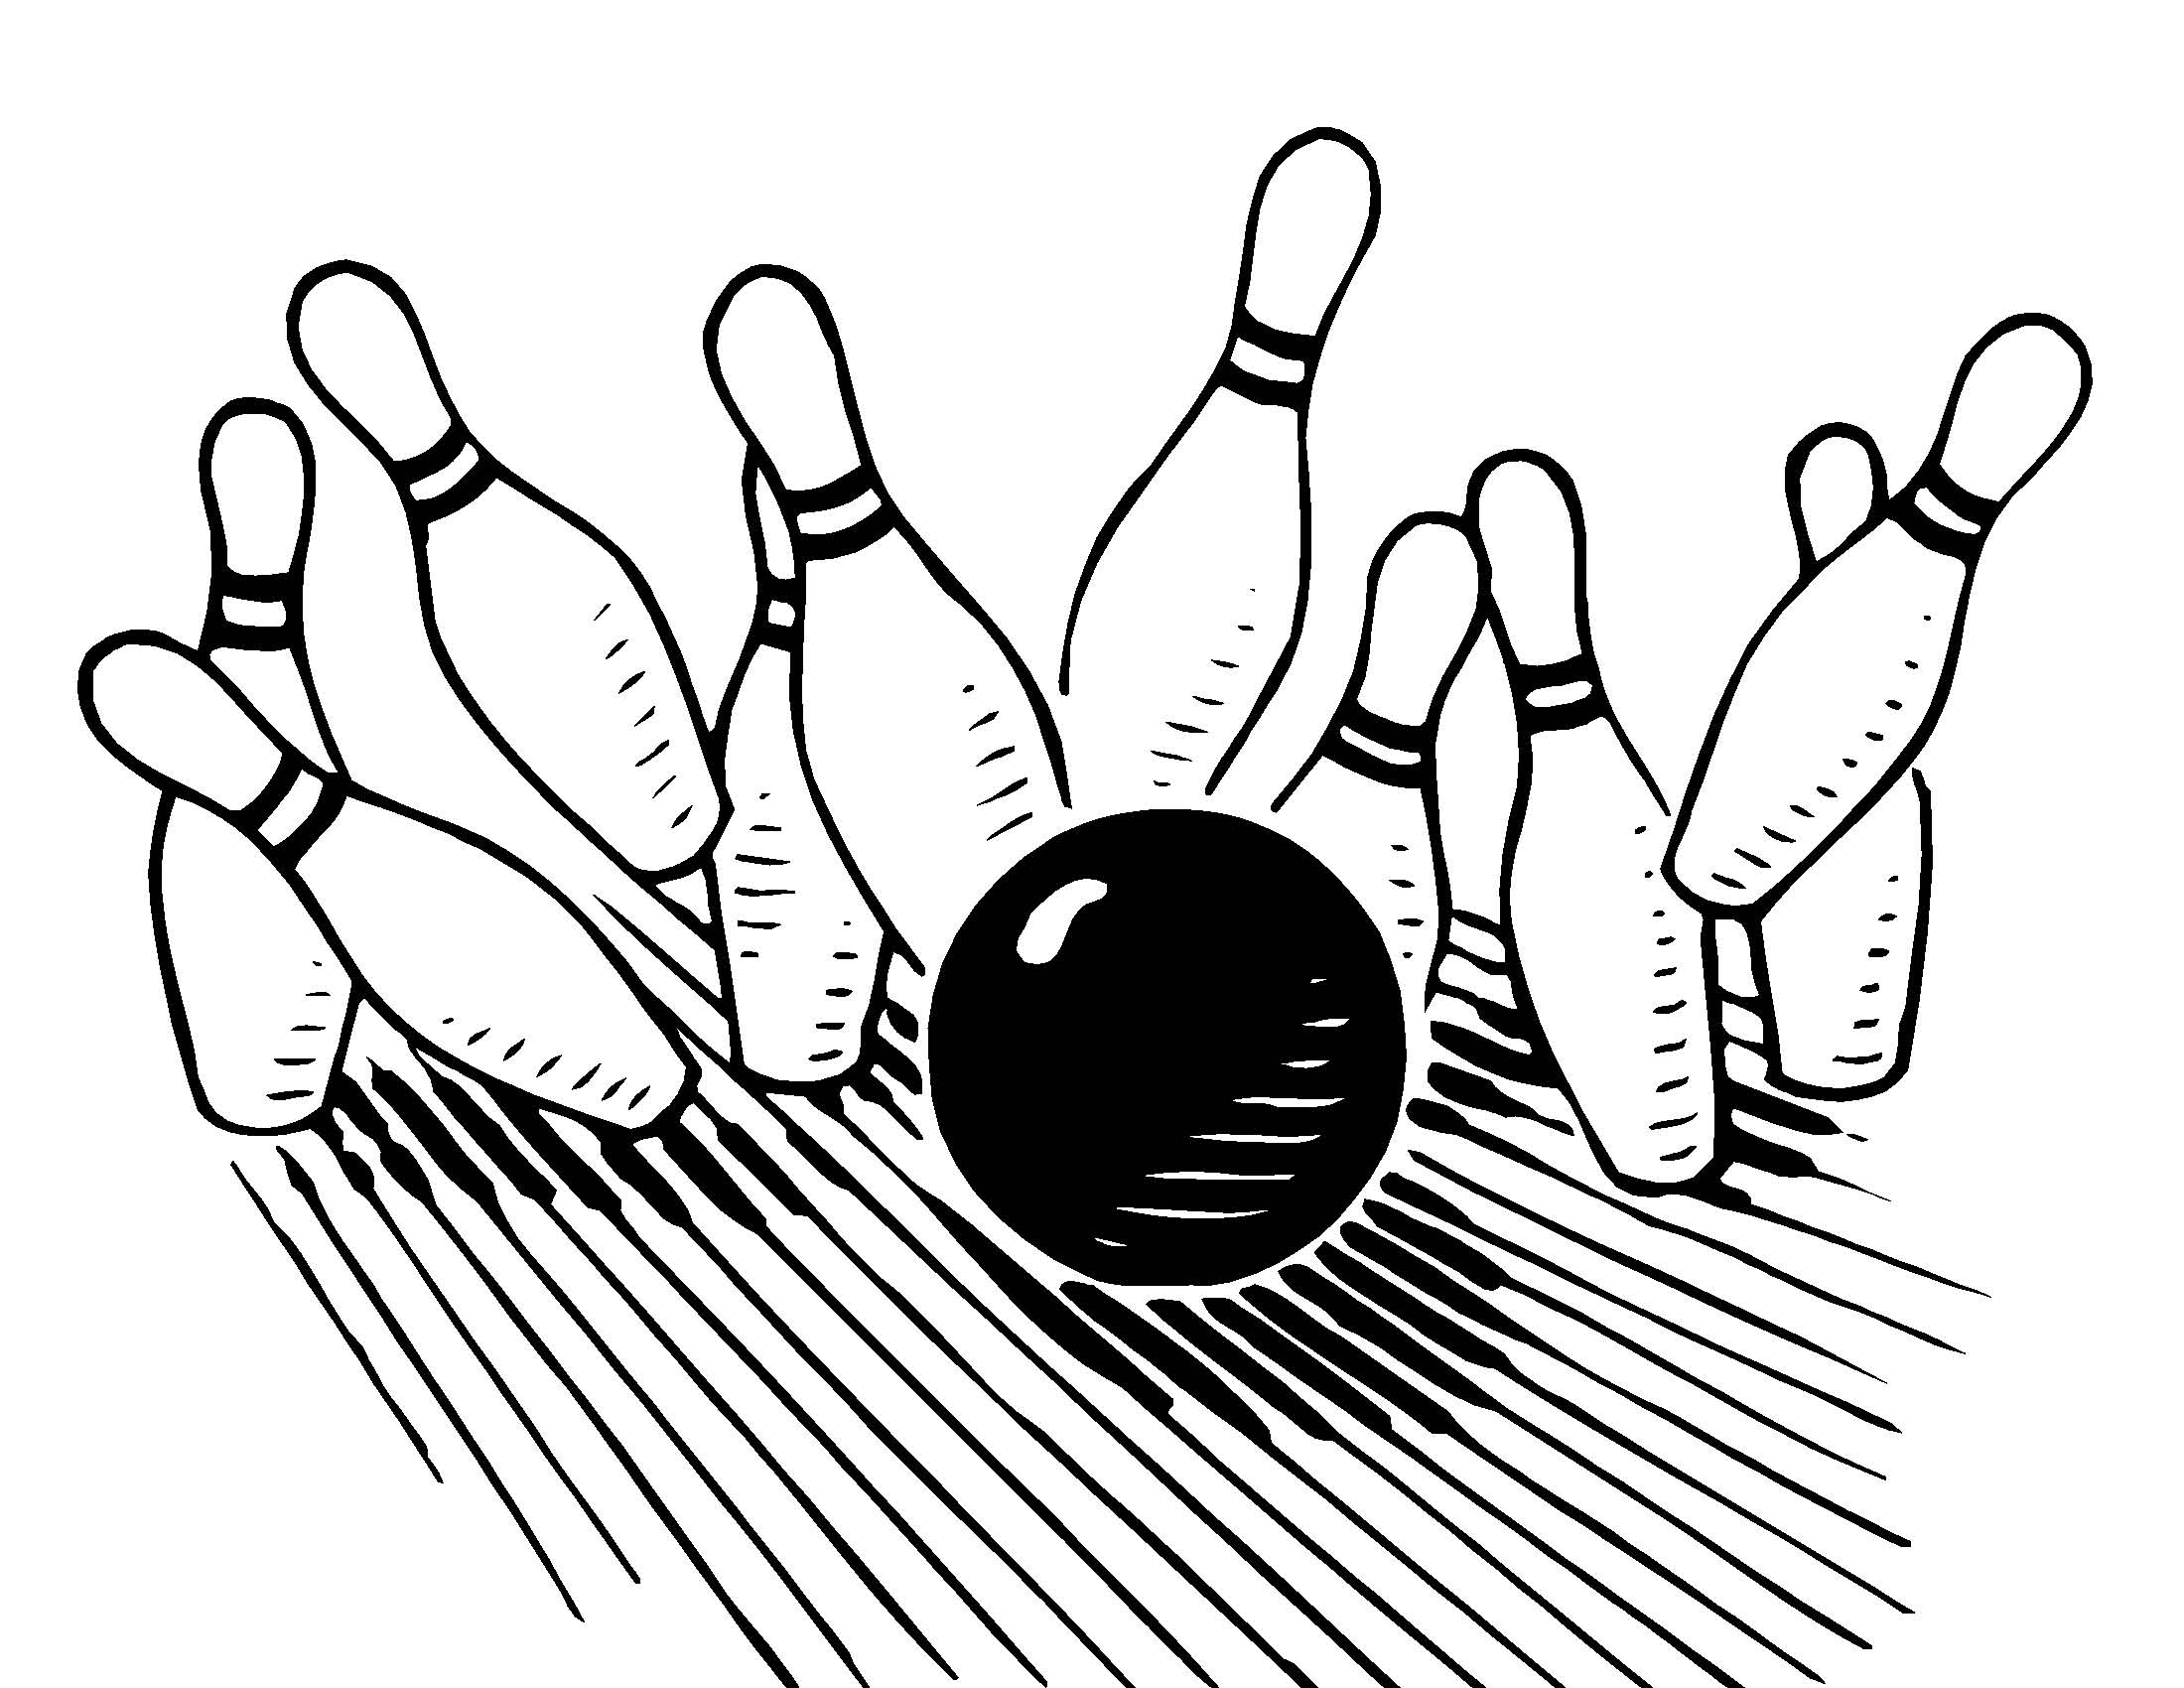 4. "Nail Art with Bowling Ball Accent" - wide 1